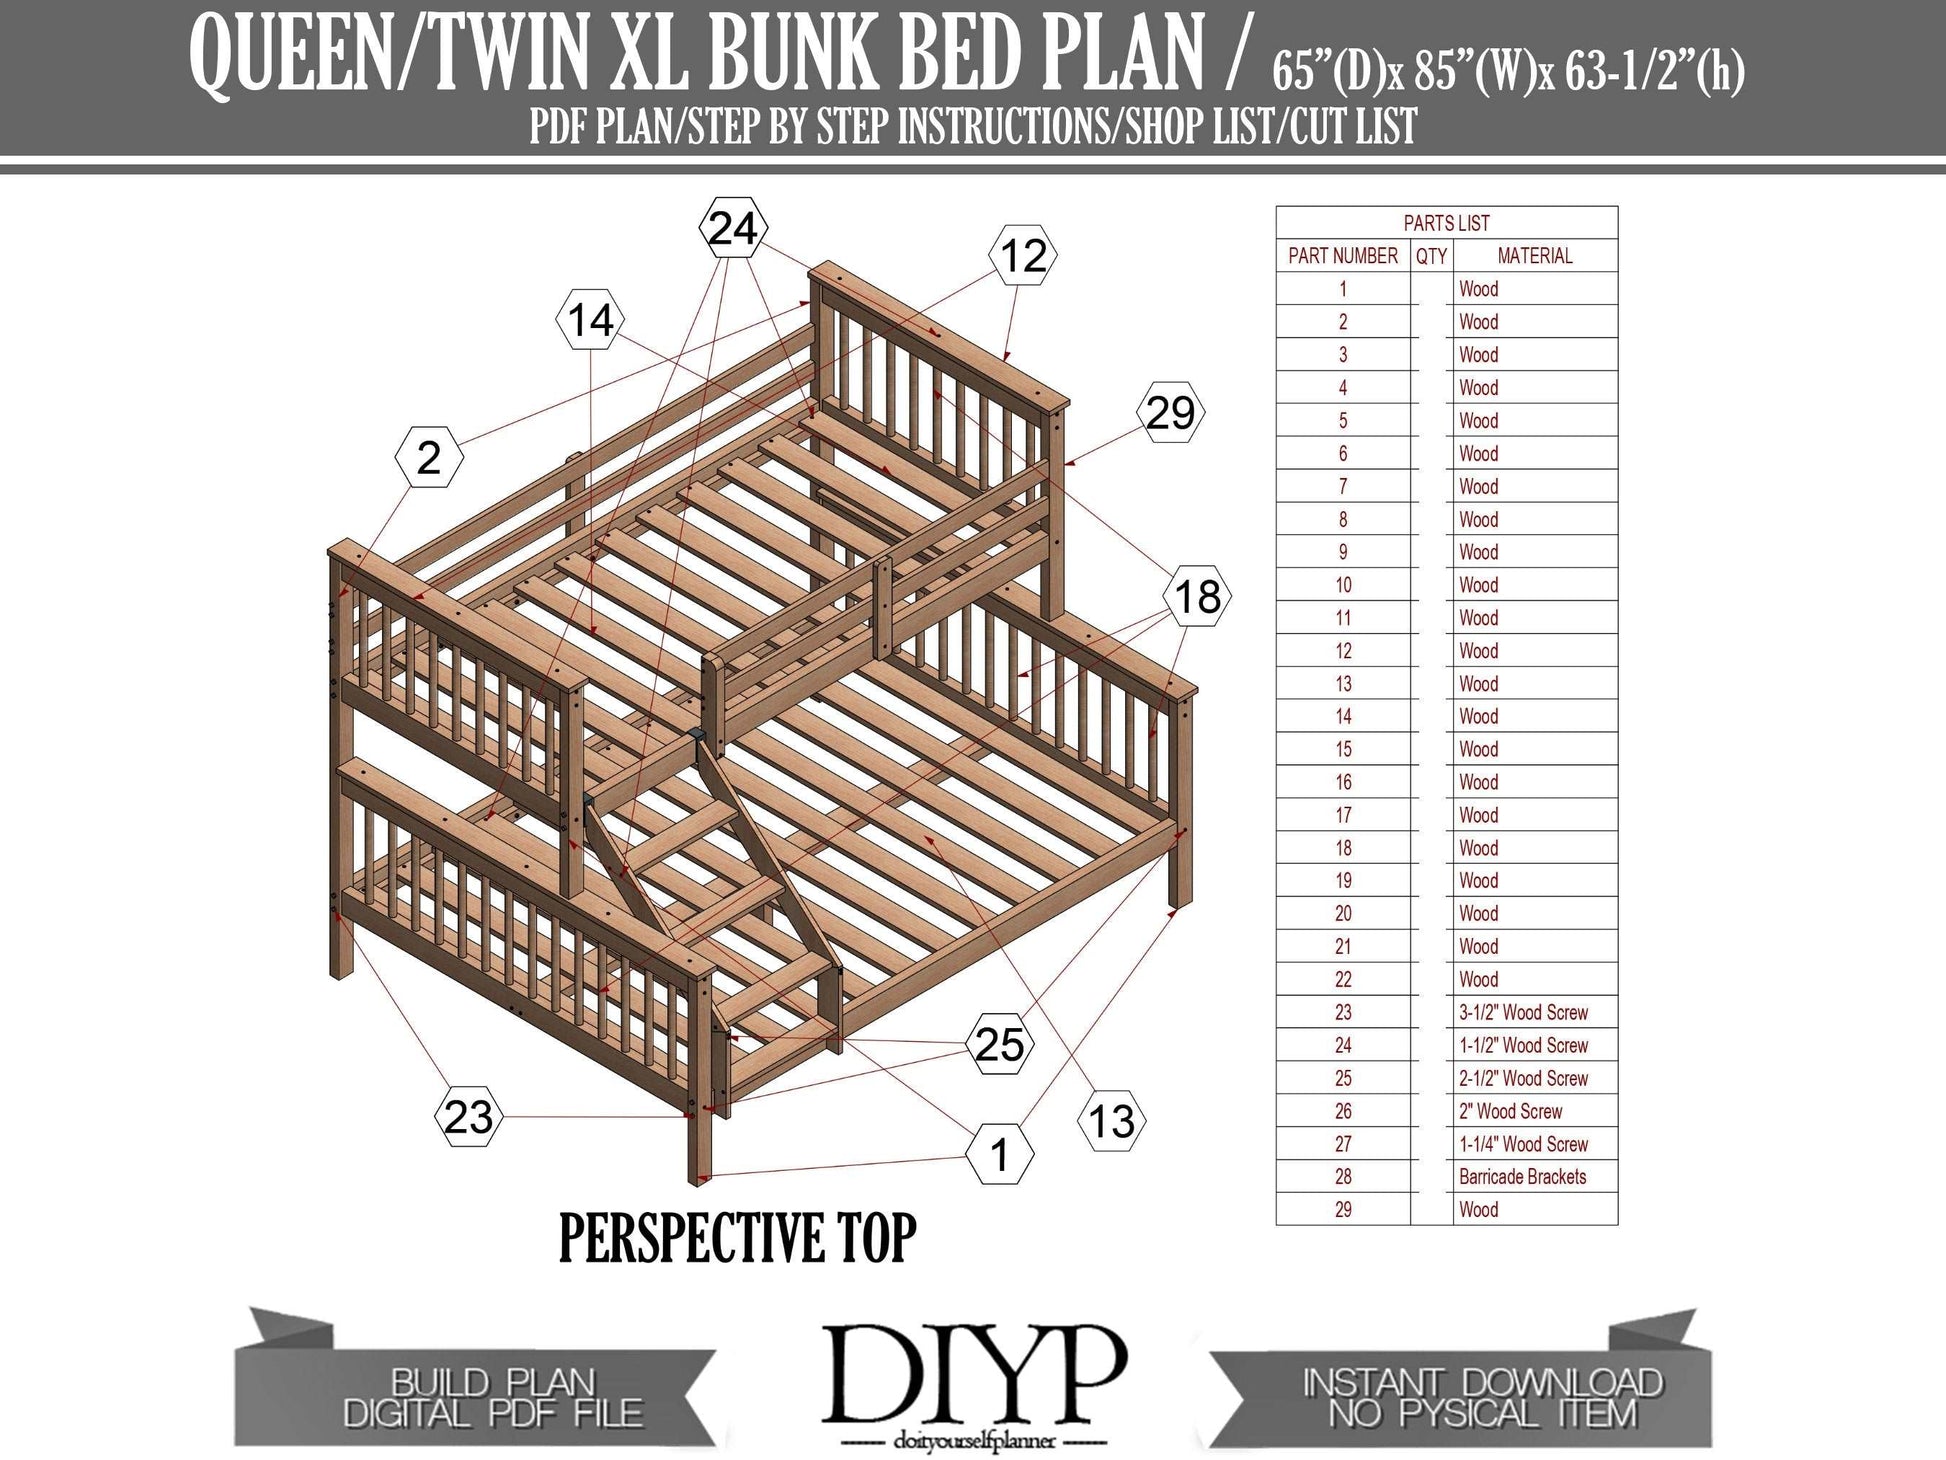 DIY plans for Bunk Bed with Queen and Twin XL Bed - Make a stylish and useful bunk bed